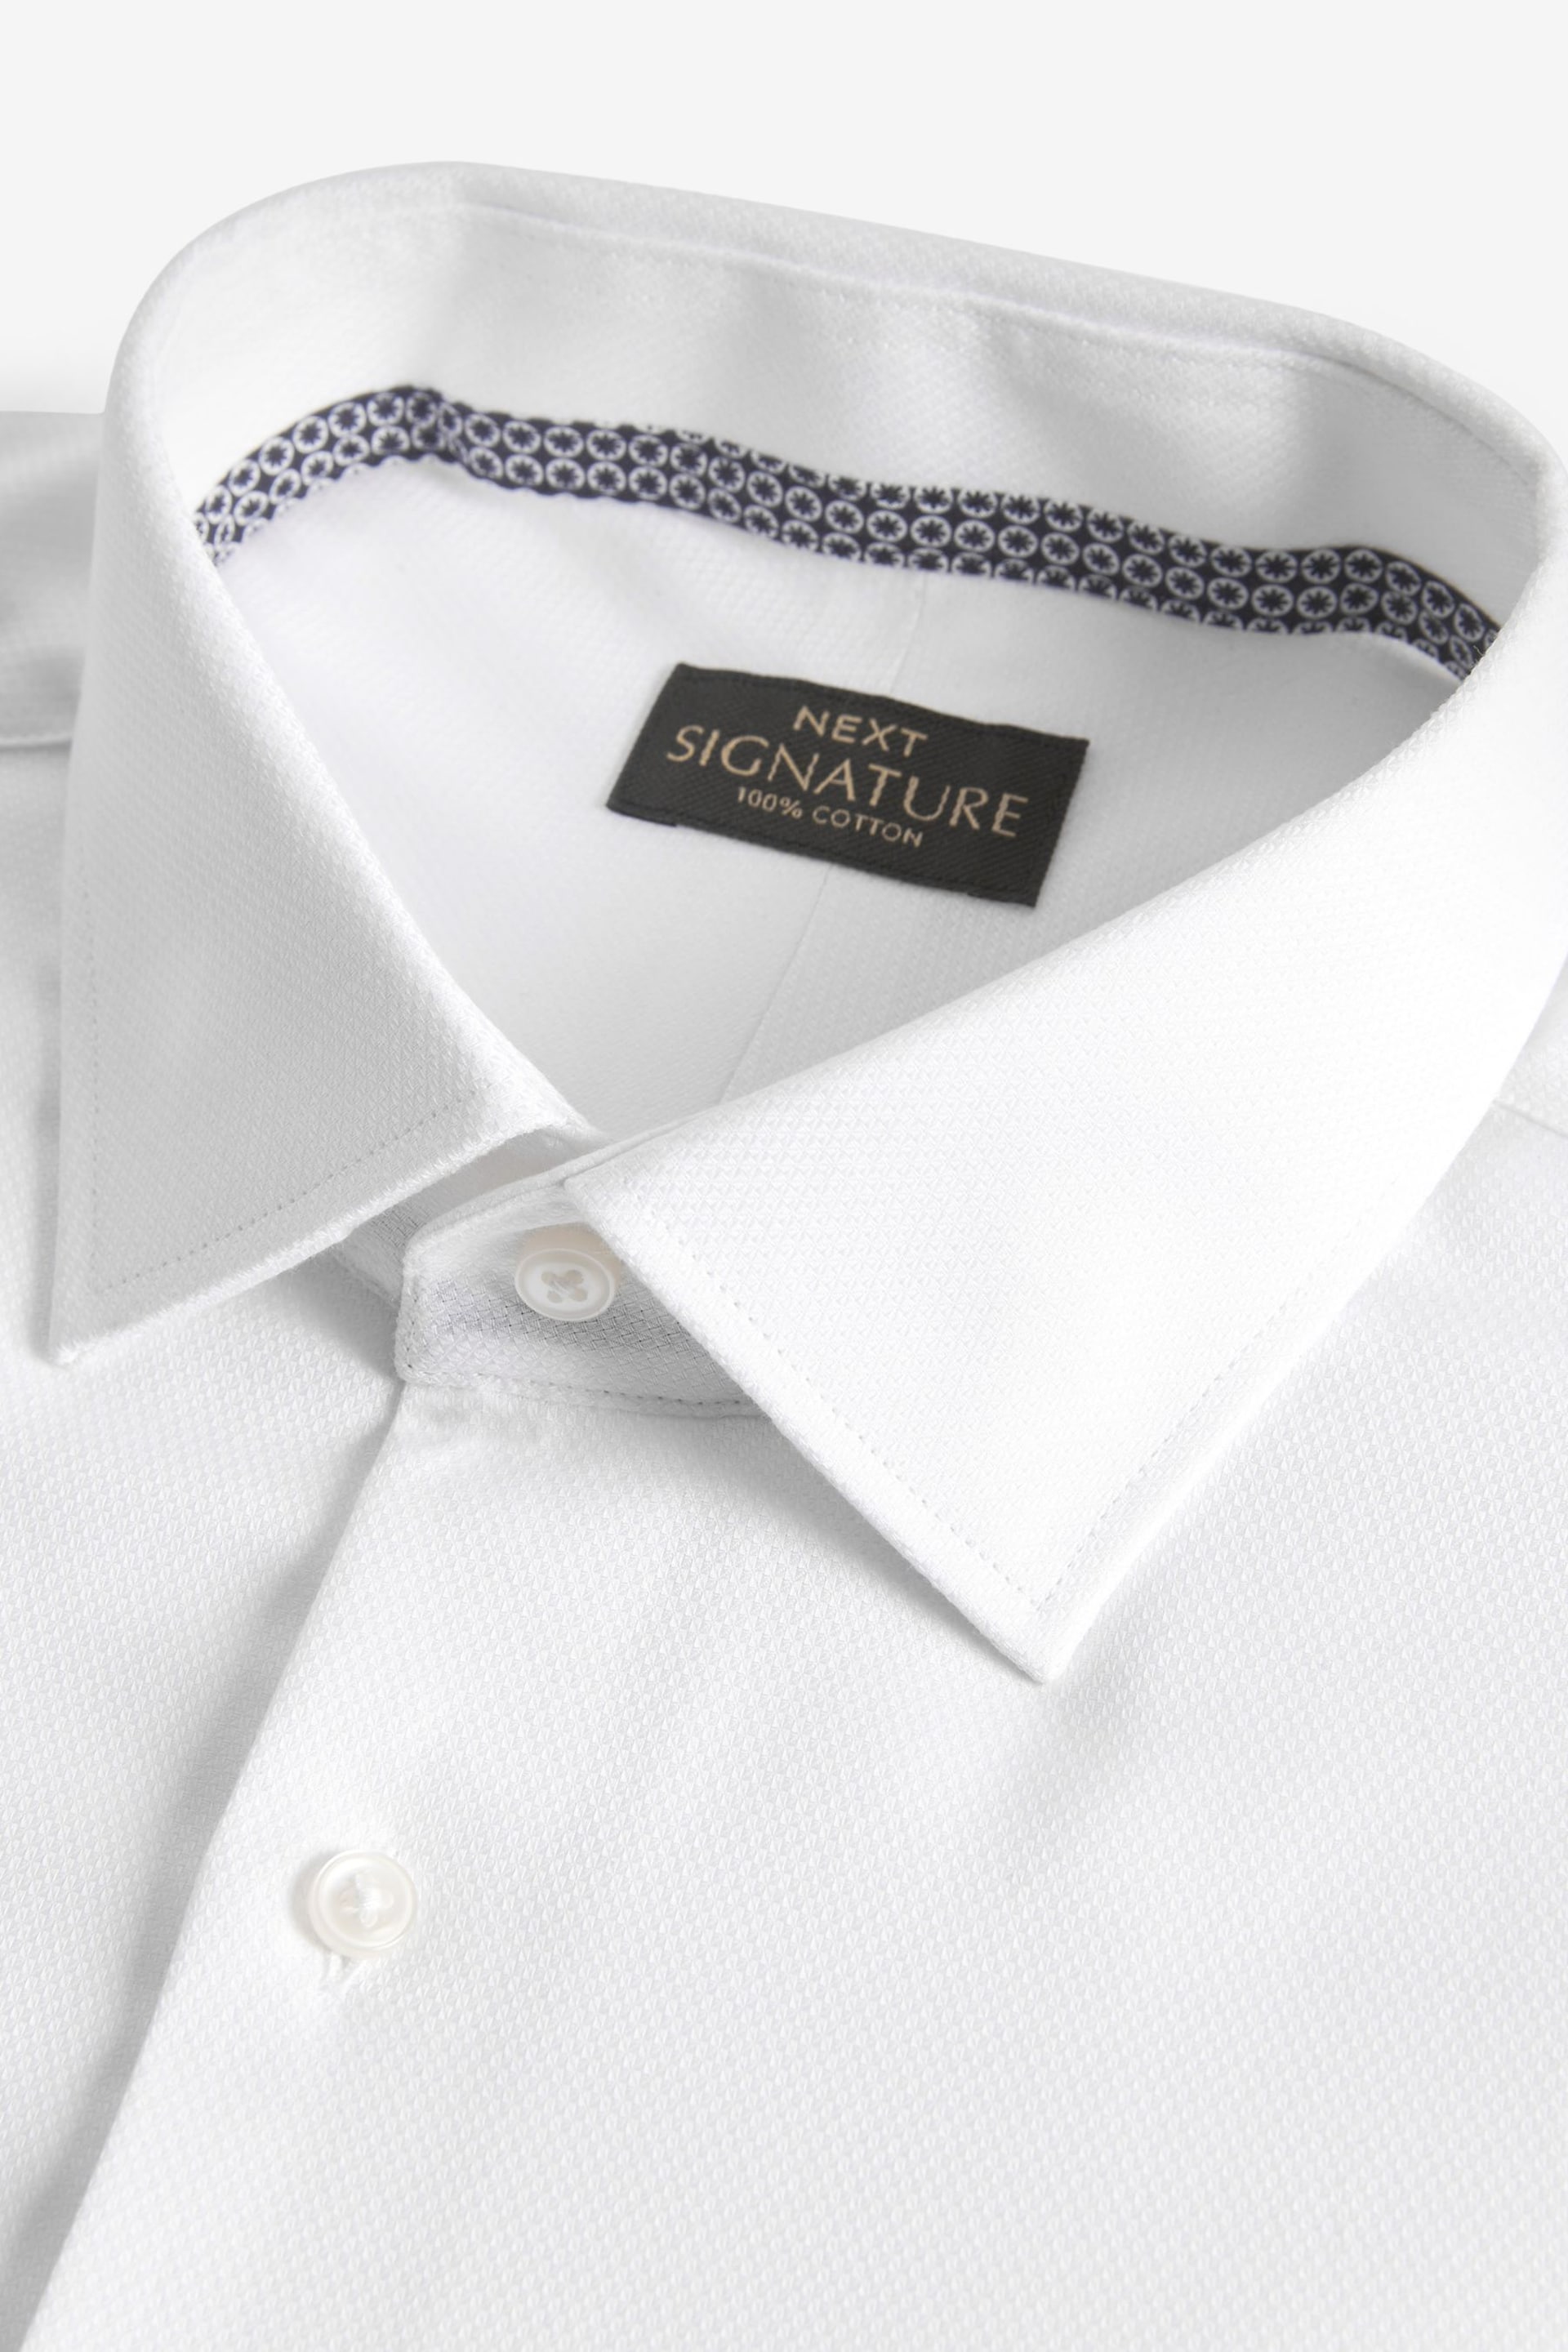 White Regular Fit Signature Textured Single Cuff Shirt With Trim Detail - Image 7 of 8